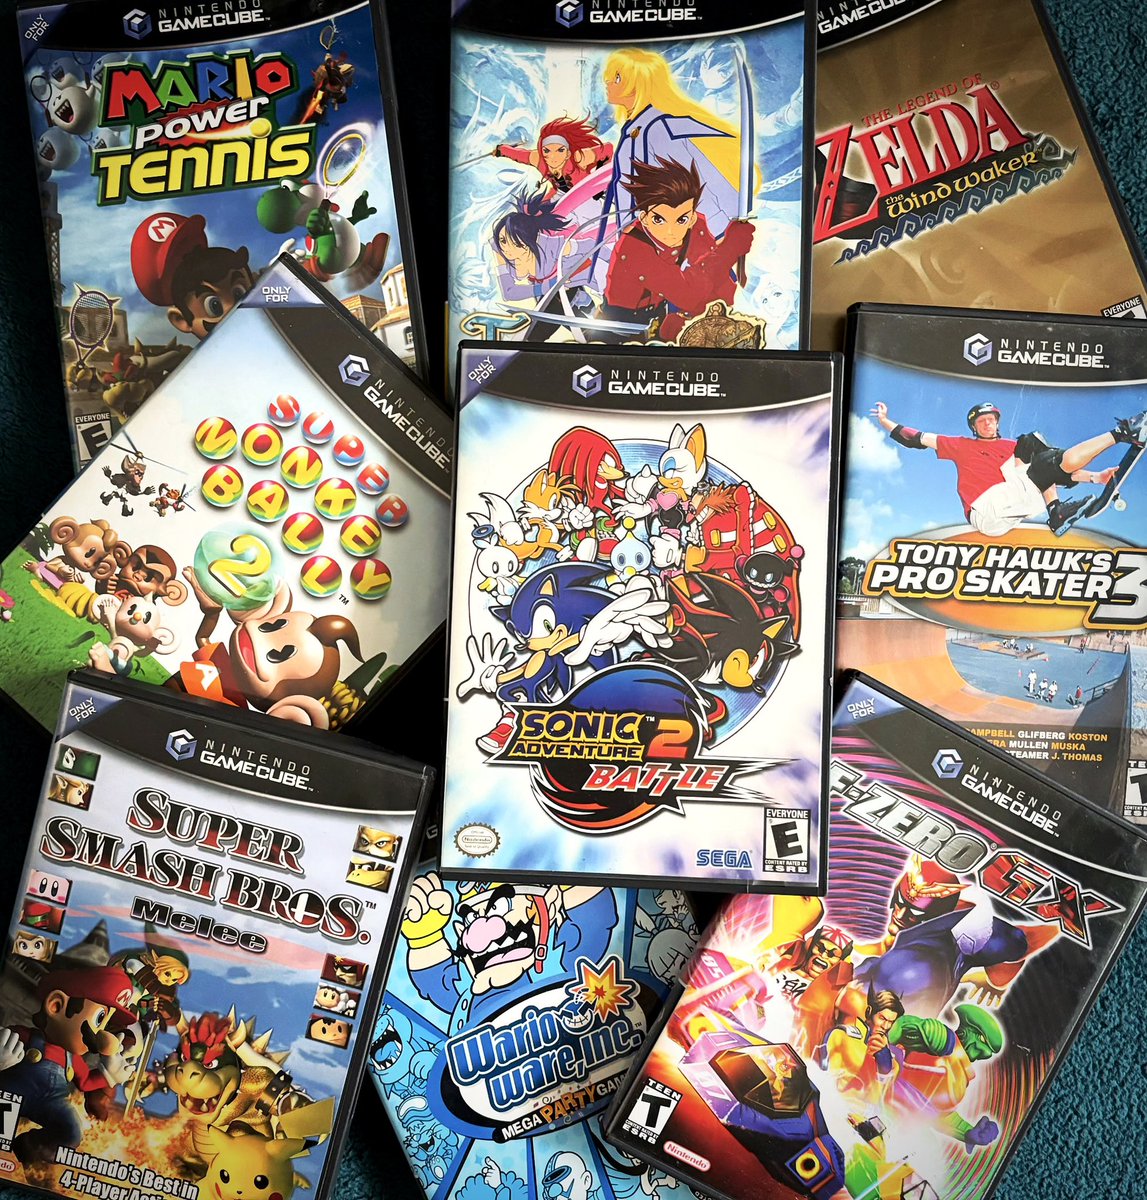 What’s the absolute best game for the Nintendo GameCube?